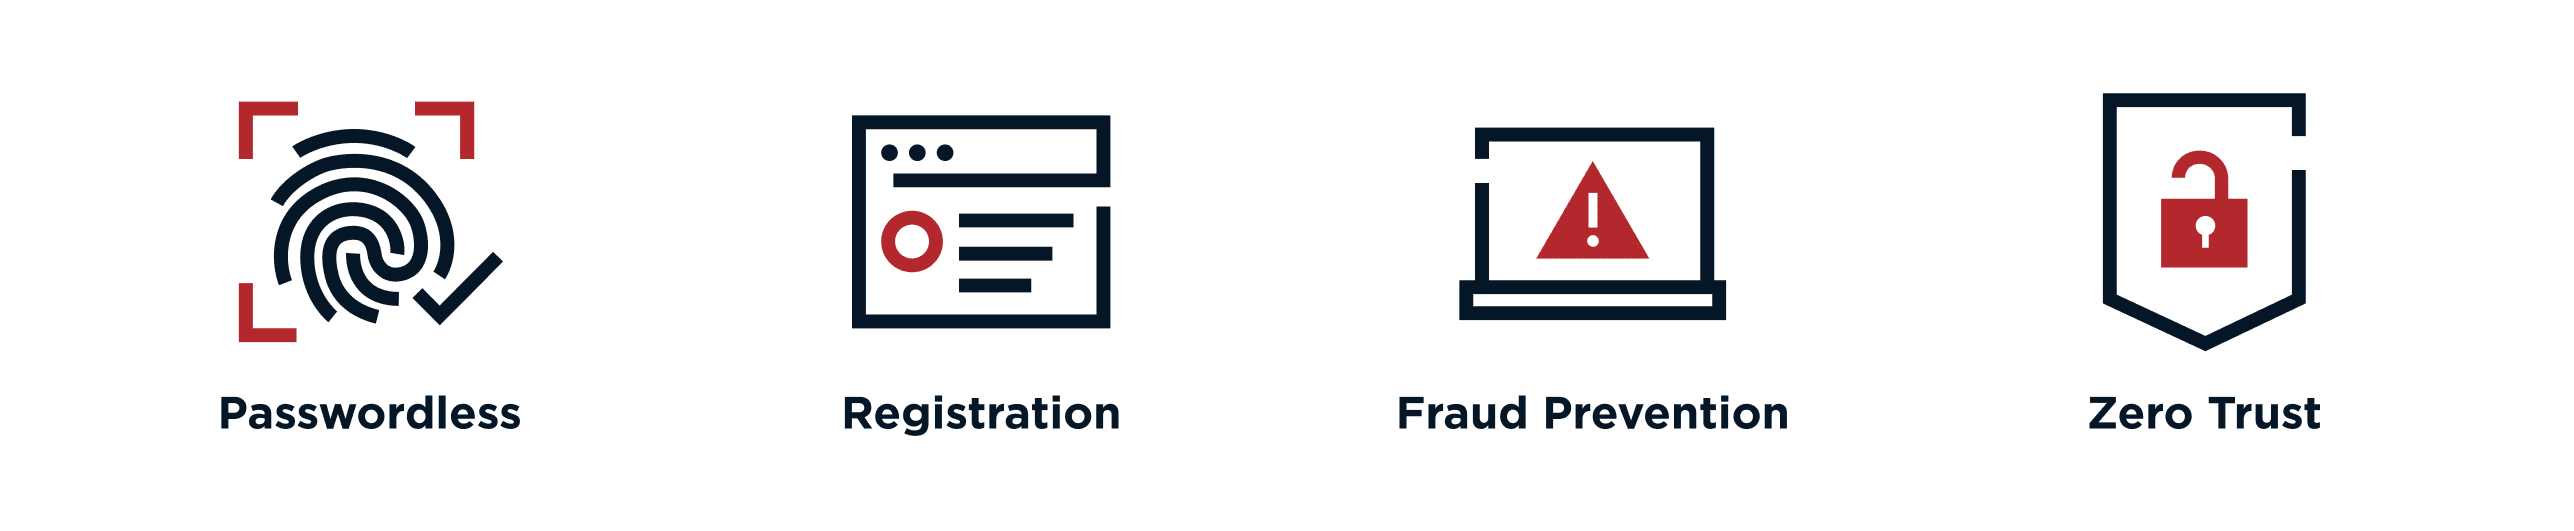 Graphic illustration of four significant business challenges where orchestration is already gaining traction: passwordless, registration, fraud prevention and zero trust.